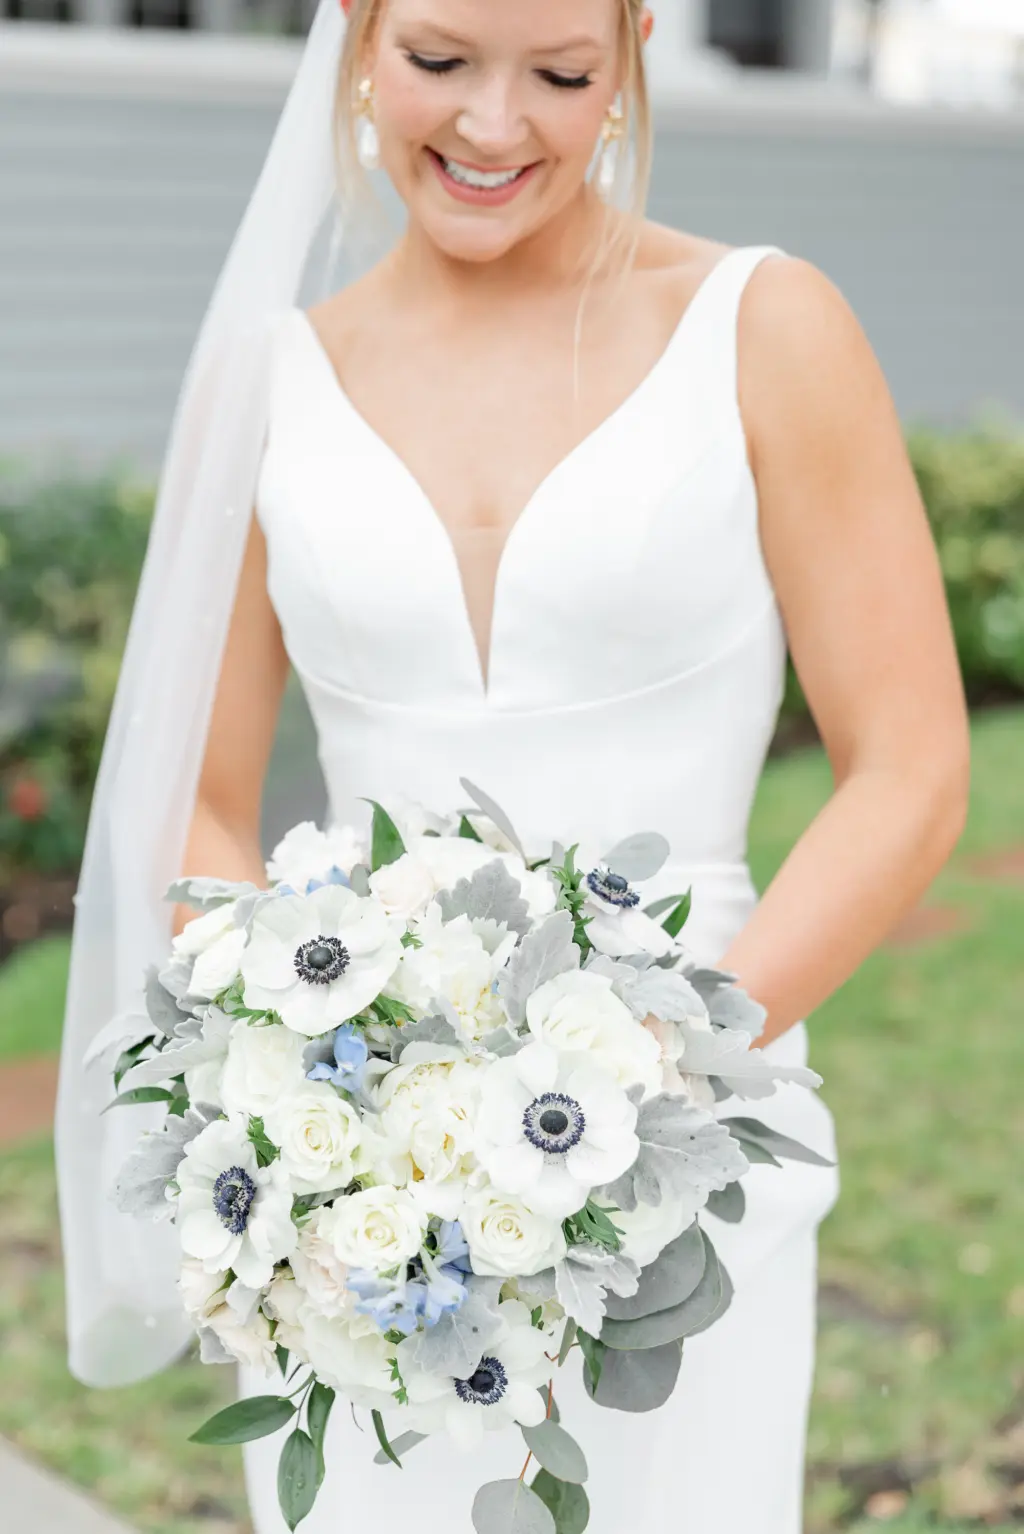 White Anemone, Roses, Blue Flowers, and Greenery Wedding Bouquet | Bridal Updo Ideas | Tampa Bay Florist Monarch Events and Design | Dress Boutique Truly Forever Bridal